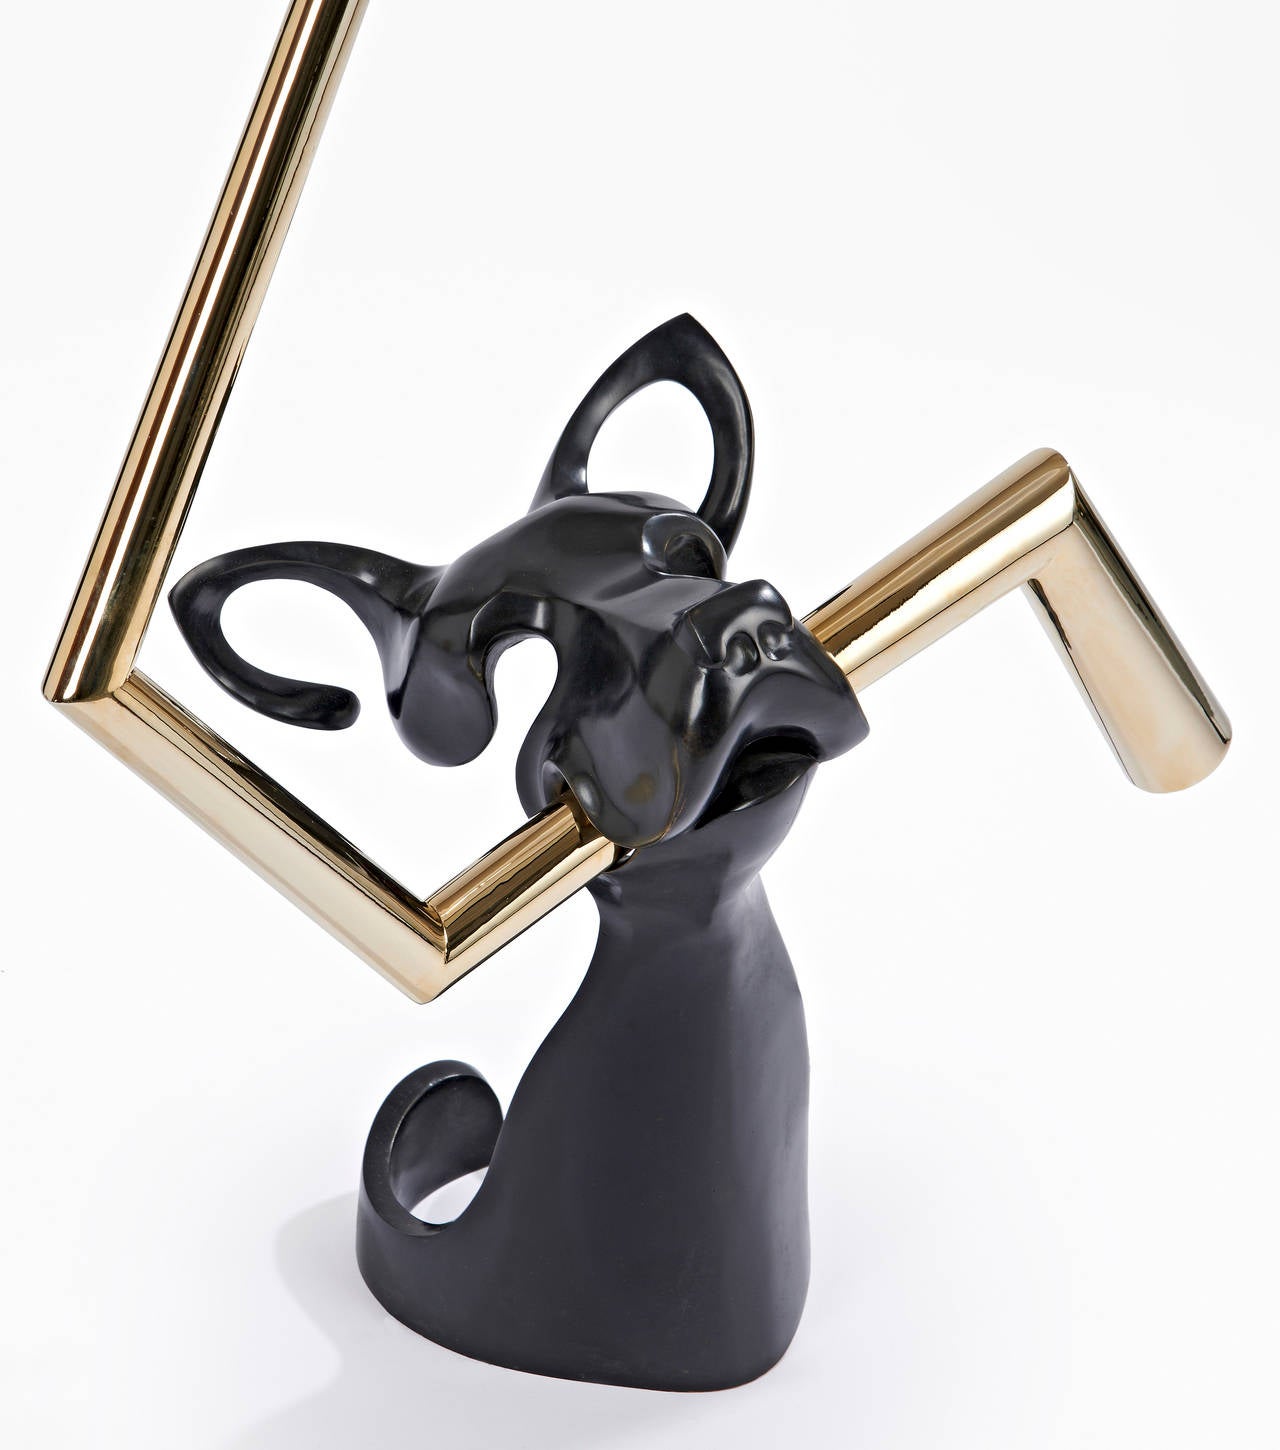 Floor lamp in bronze and steel.
The dog sculpture is in patinated bronze and the bar in plated steel.
Edition of 15.
Signed and numbered on the dog.

Hubert le Gall was born in Lyon in 1961. After graduating in management, he decided to move to